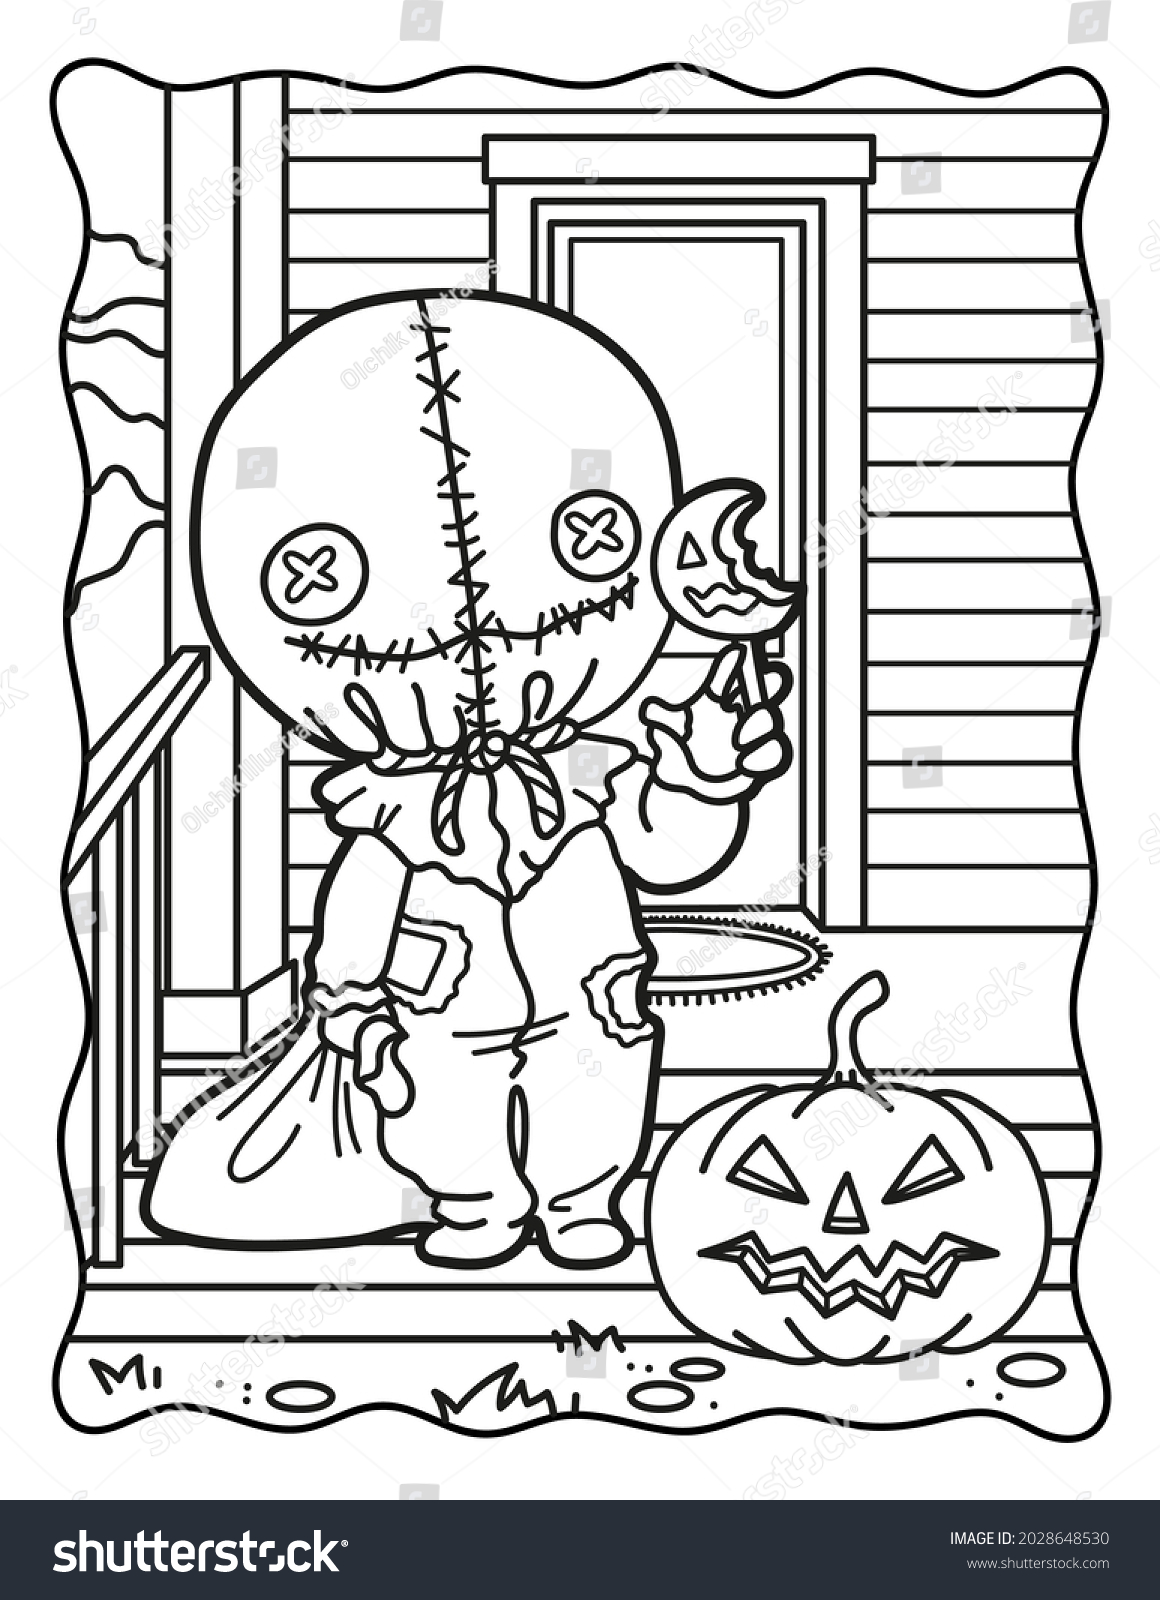 Horror coloring pages photos and images